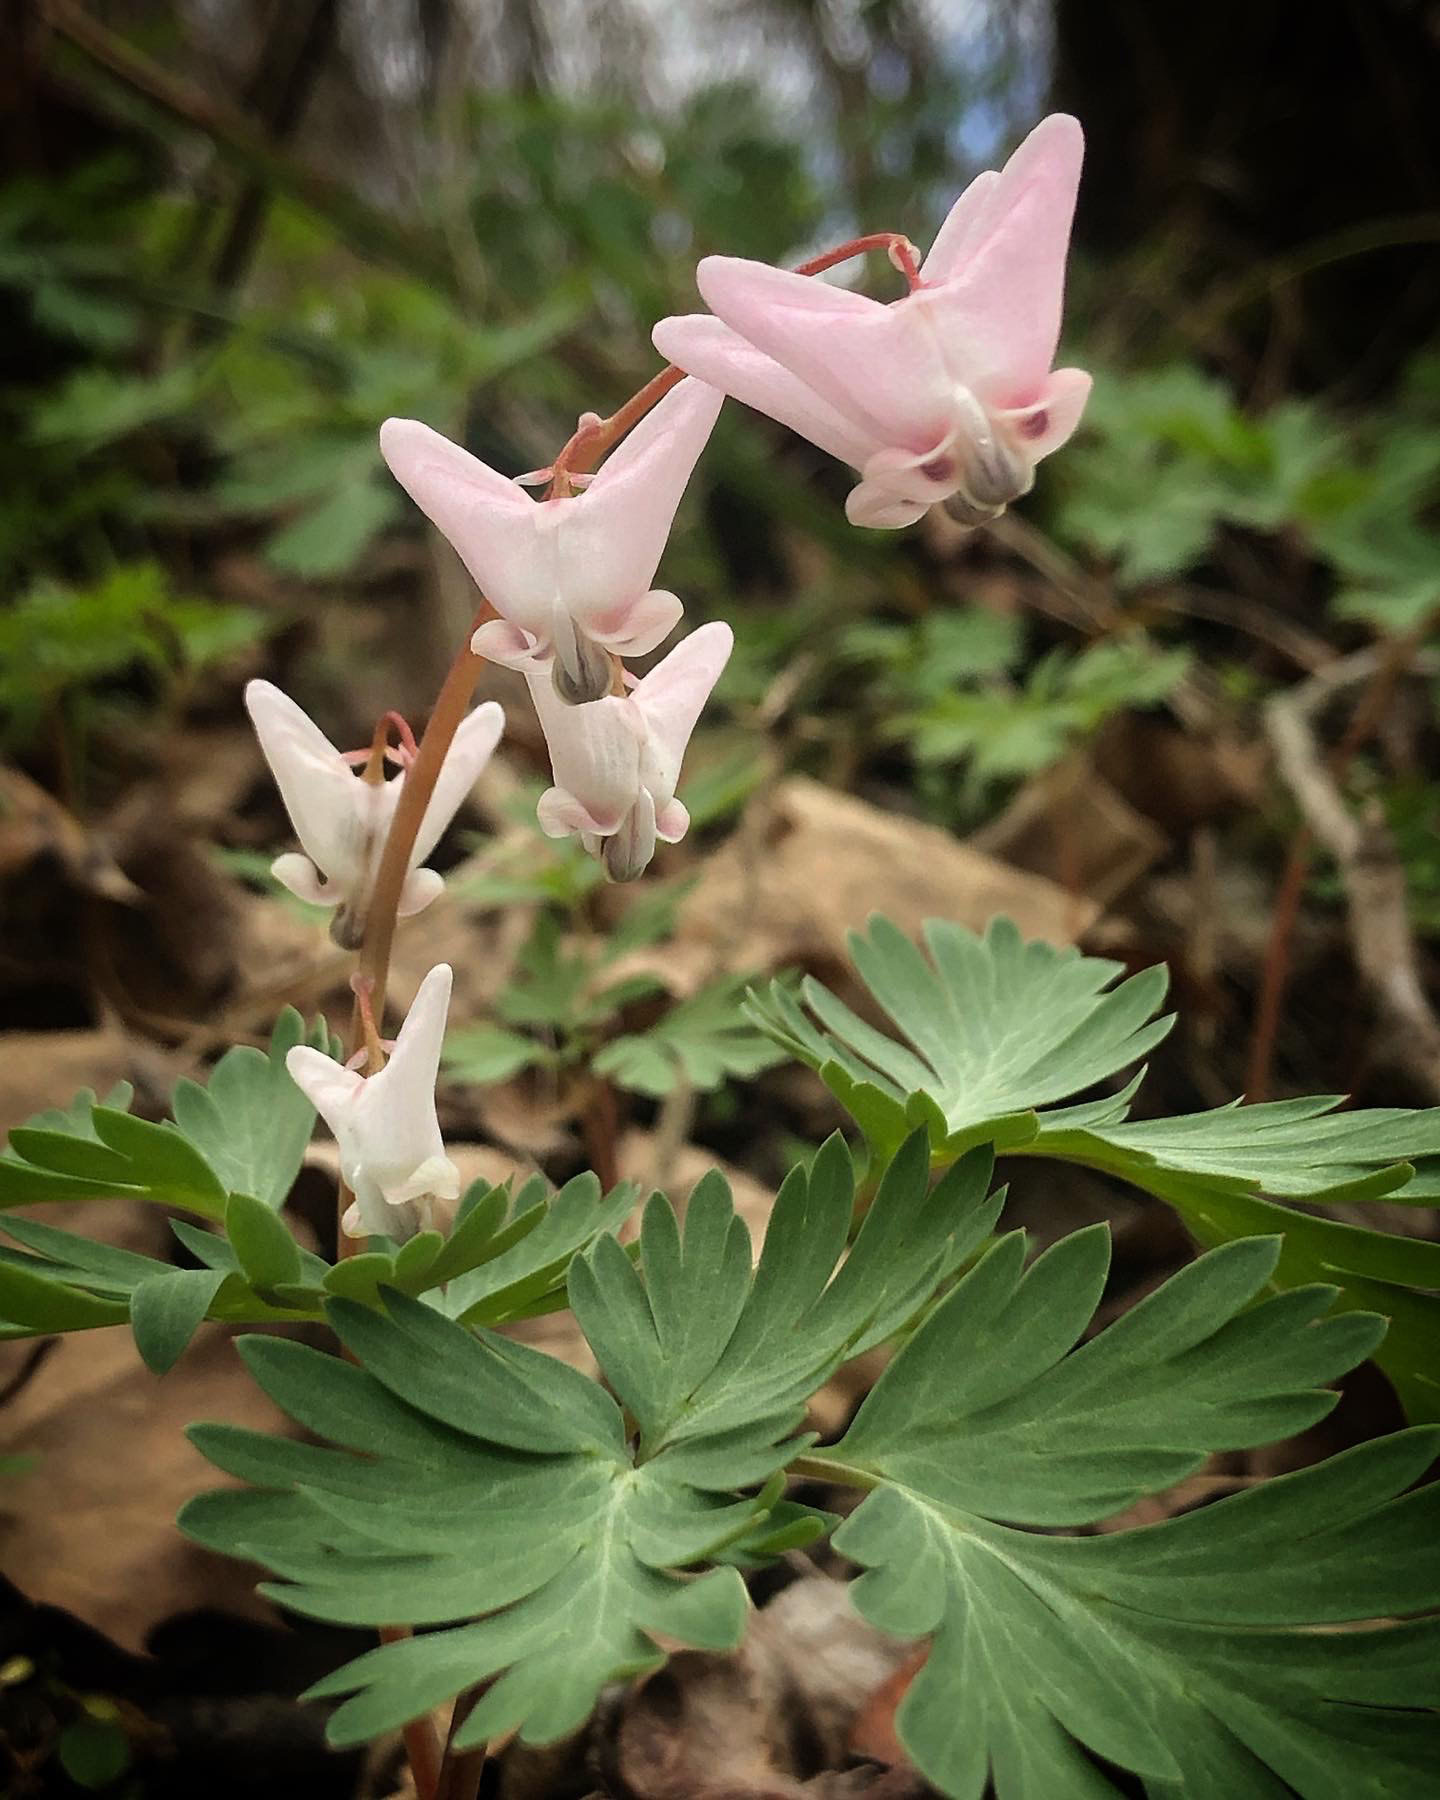 A photo of Dutchmen's Breeches, one of my favorite early spring wildflowers. It's pleasant work to take their photos.